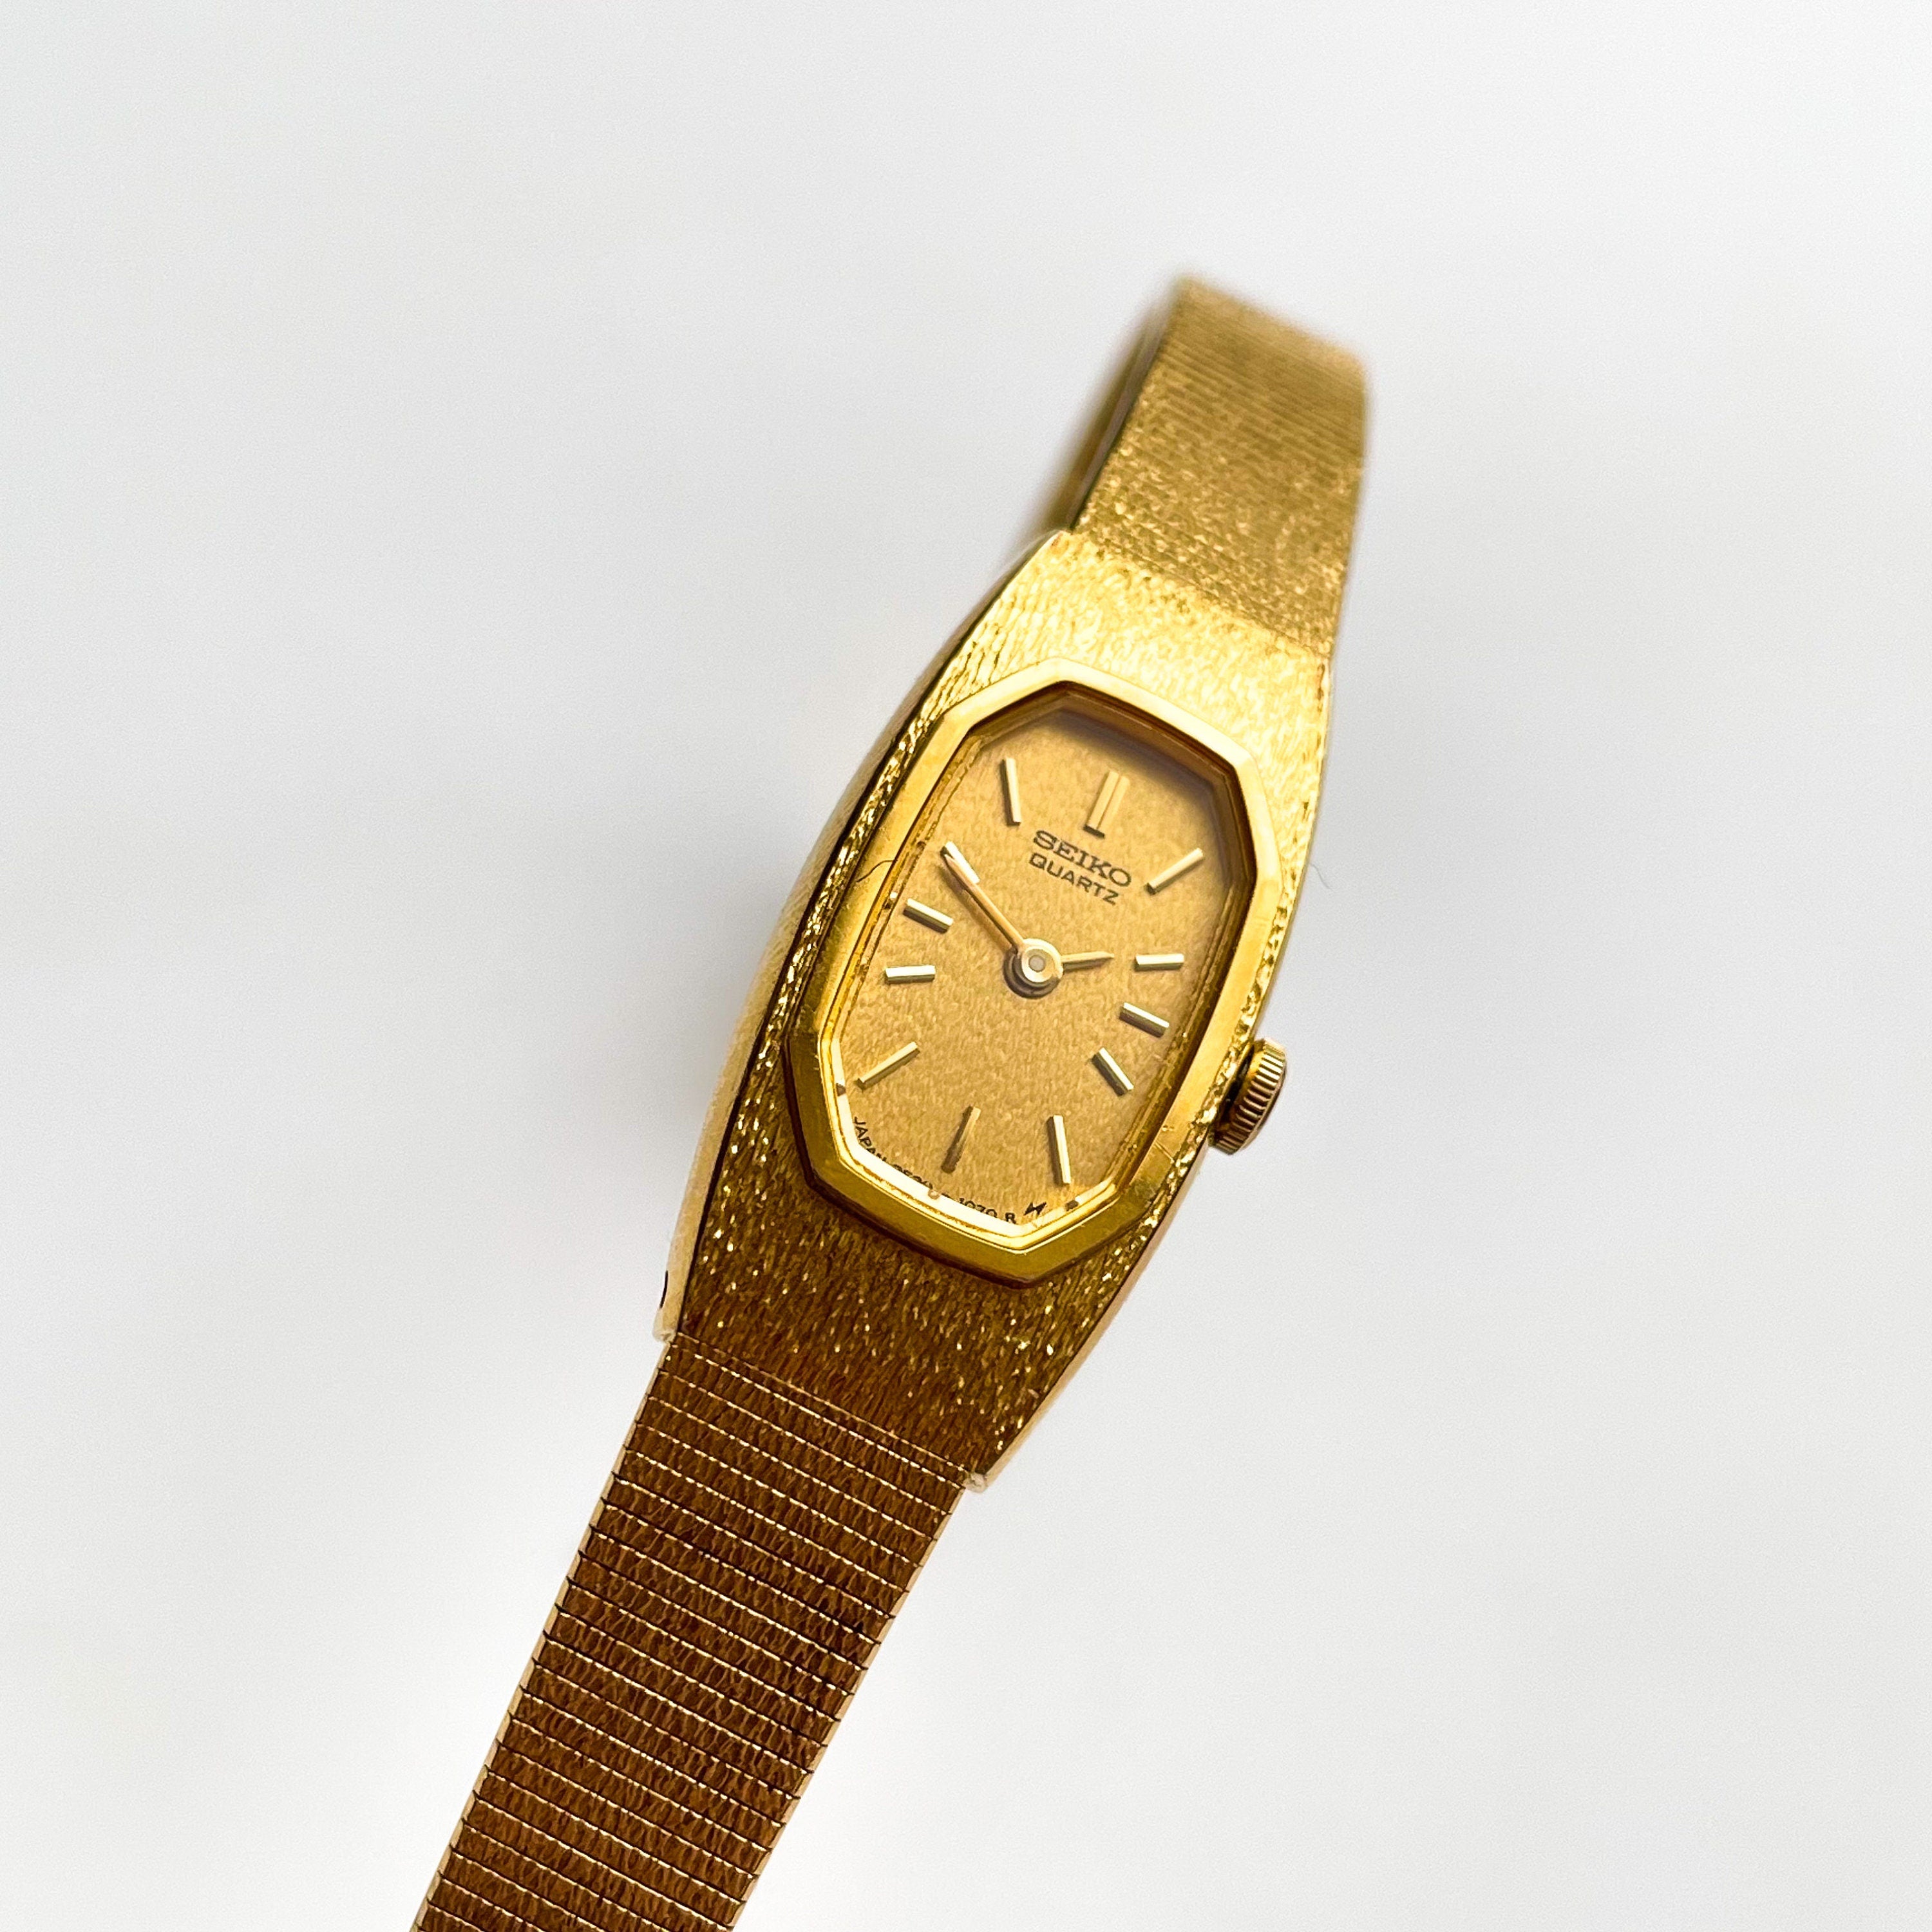 1990s Ladies' Gold-Plated Seiko Quartz Watch with Octagon Dial